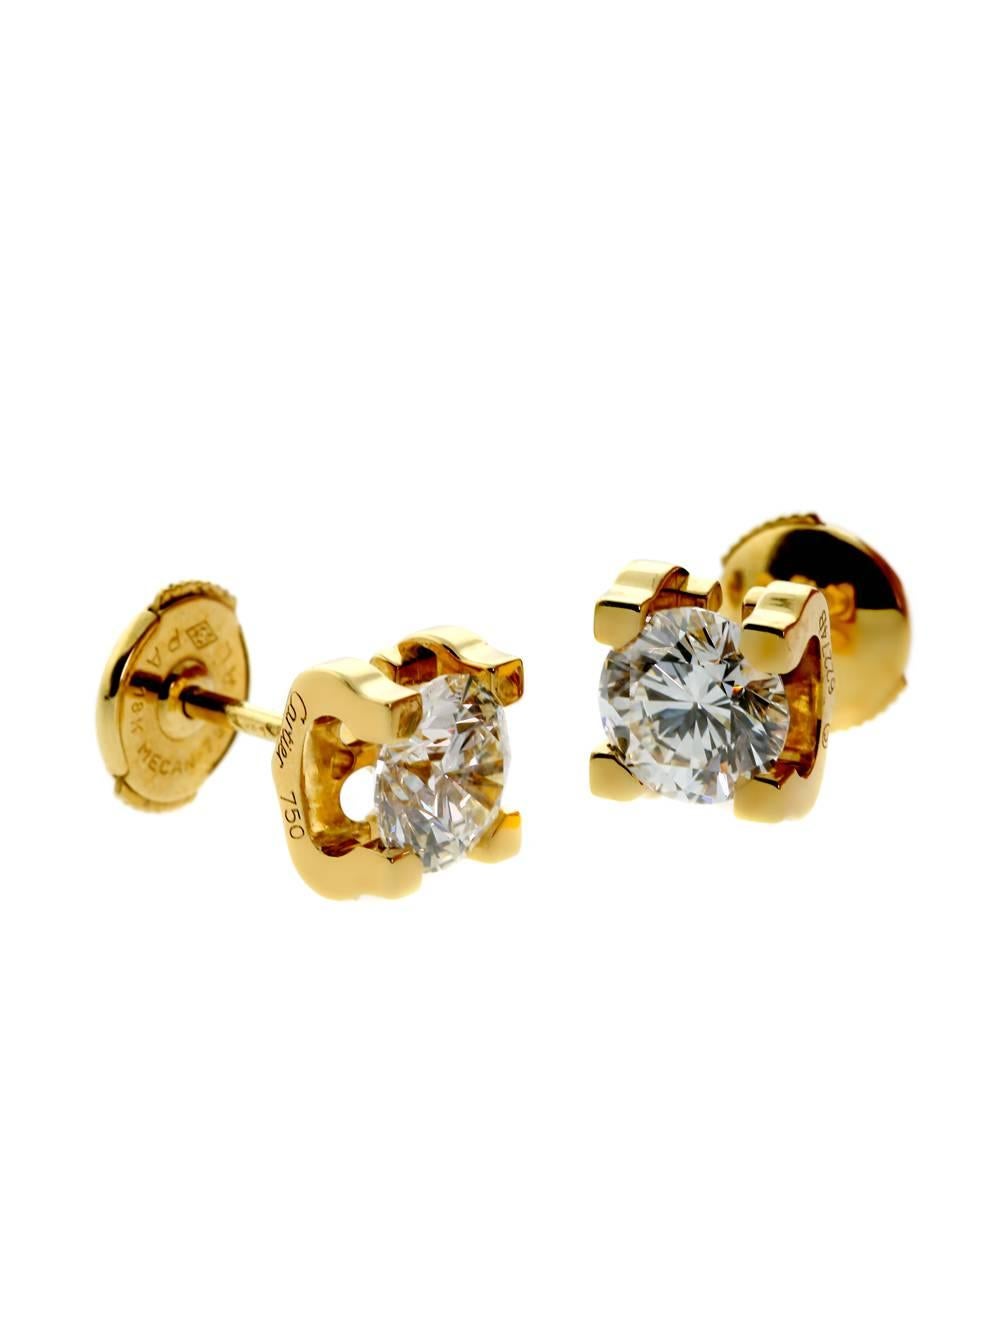 These diamond stud earrings exemplify tradition as they feature a yellow gold setting that clasps a round white diamond. Since each gem’s weight comes to slightly more than 1 carat, the earrings will glisten and twinkle with the slightest